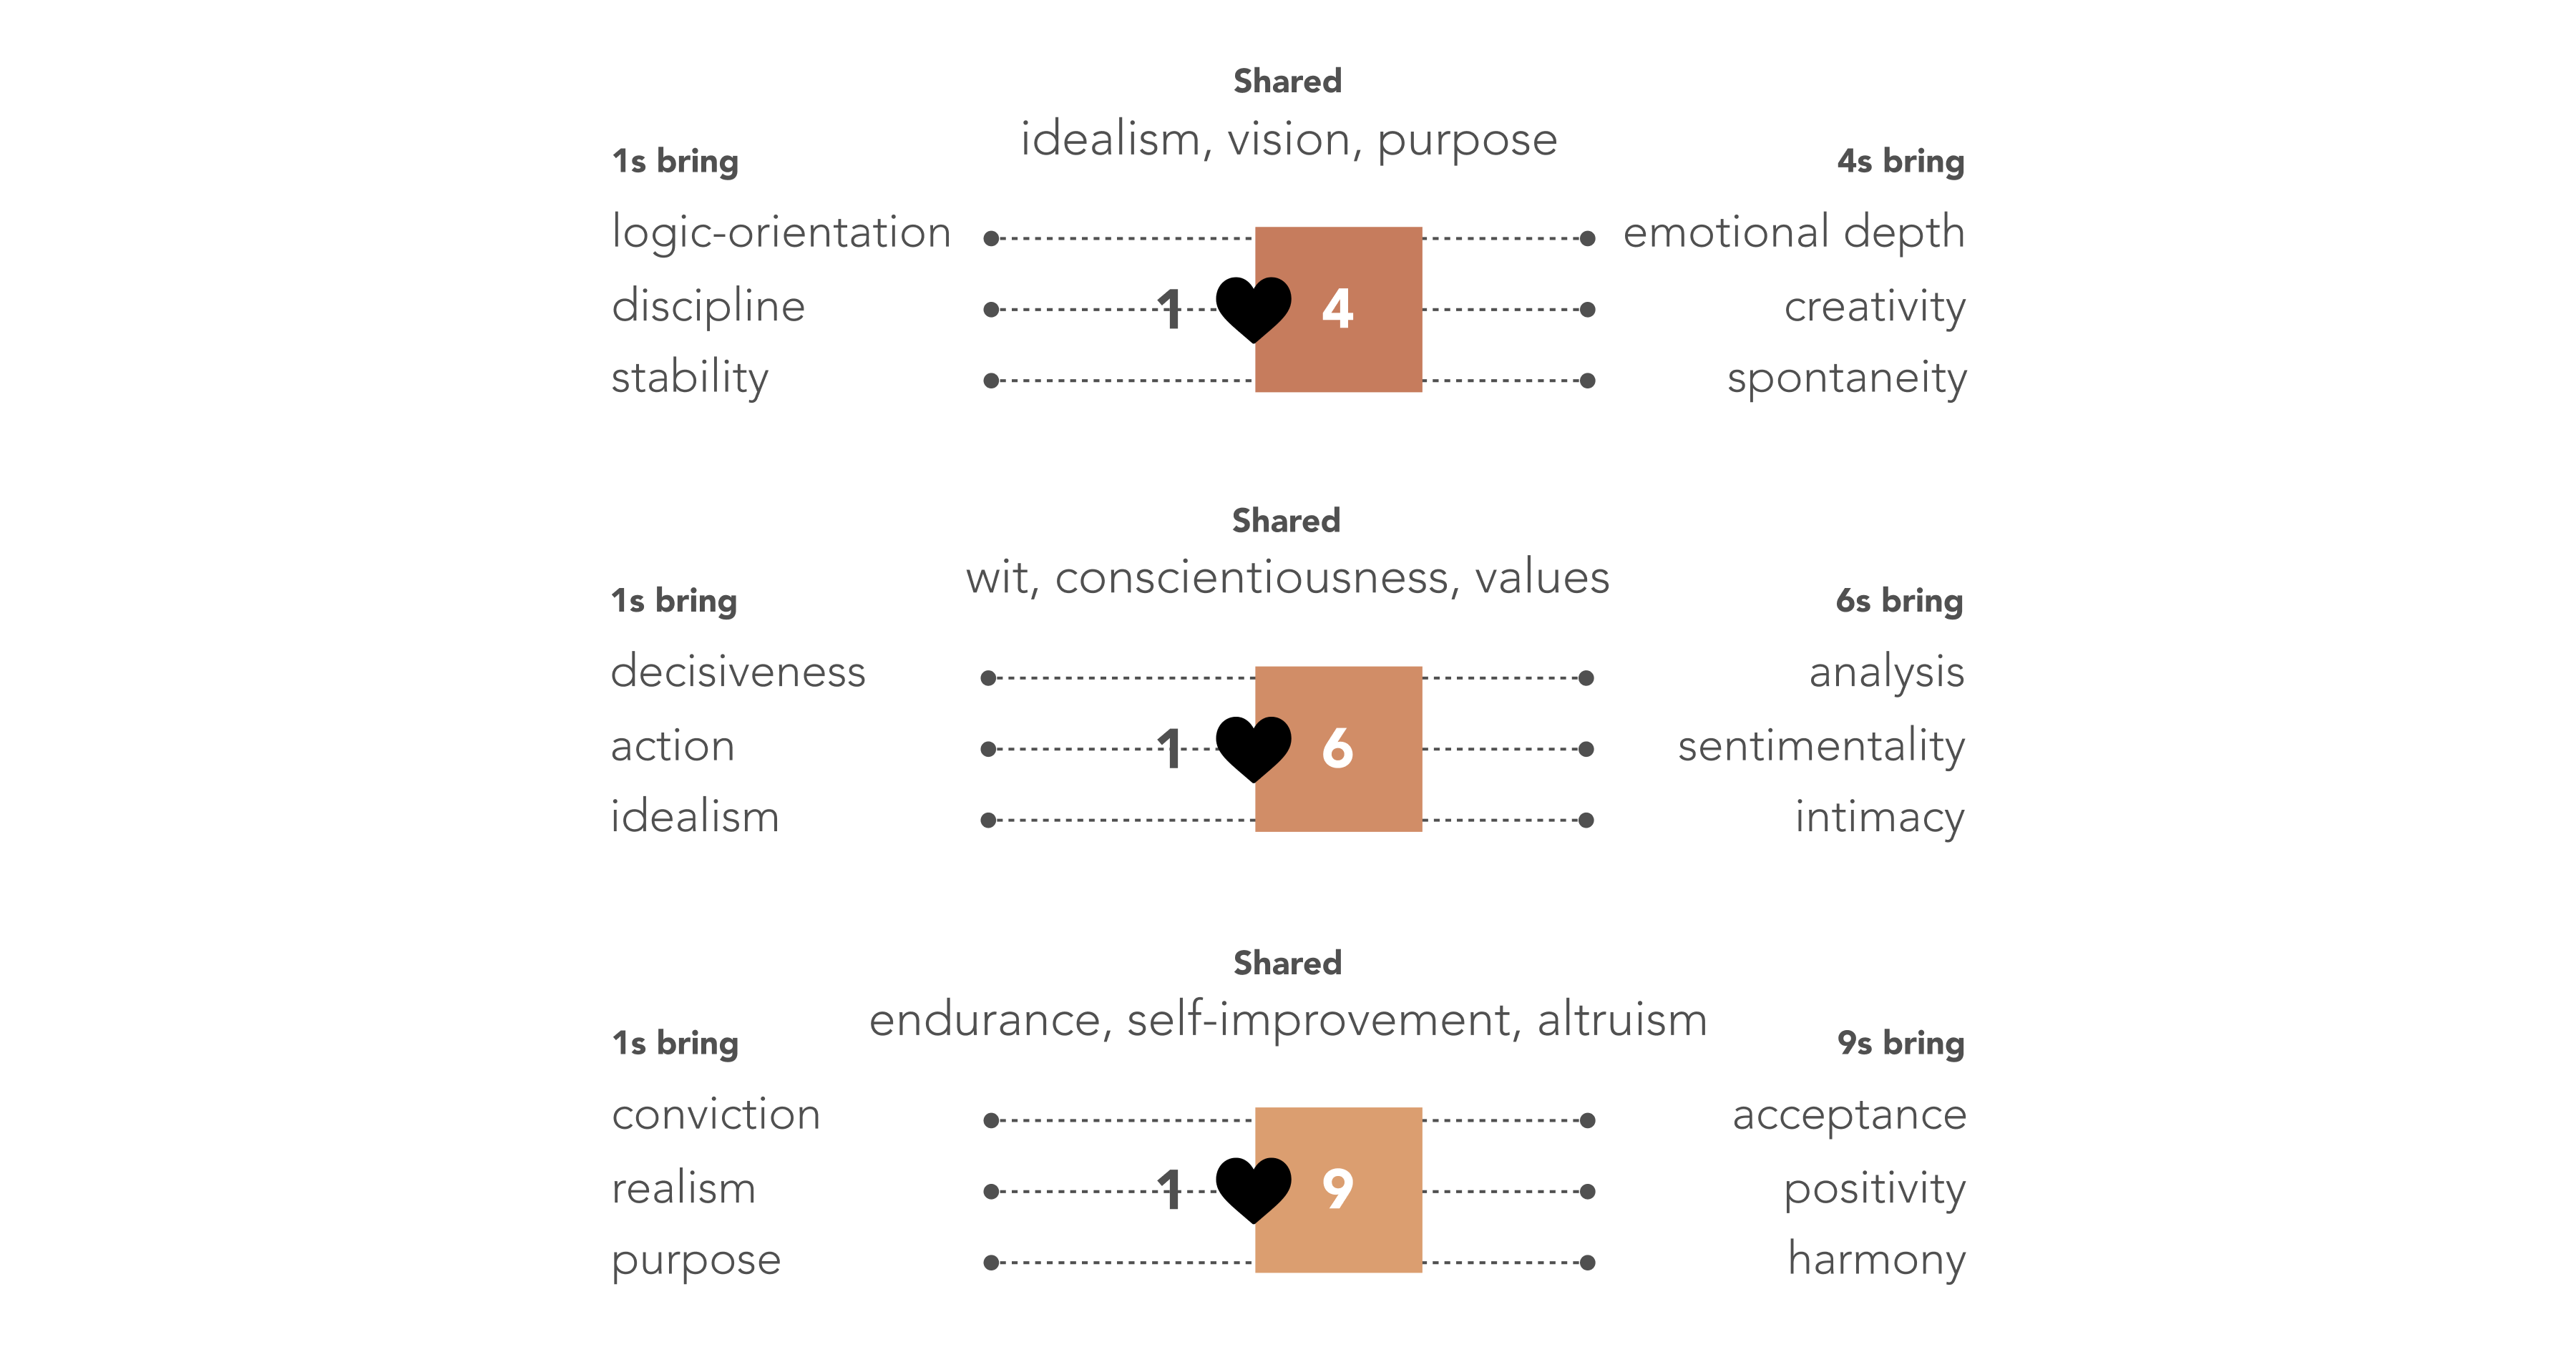 1s and 4s share idealism, vision, purpose. 1s bring logic-orientation, discipline, stability, while 4s bring emotional depth, creativity, spontaneity. 1s and 6s share wit, conscientiousness, vales. 1s bring decisiveness, action, idealism, while 6s bring analysis, sentimentality, intimacy. 1s and 9s share endurance, self-improvement, altruism. 1s bring conviction, realism, purpose, while 9s bring acceptance, positivity, harmony.